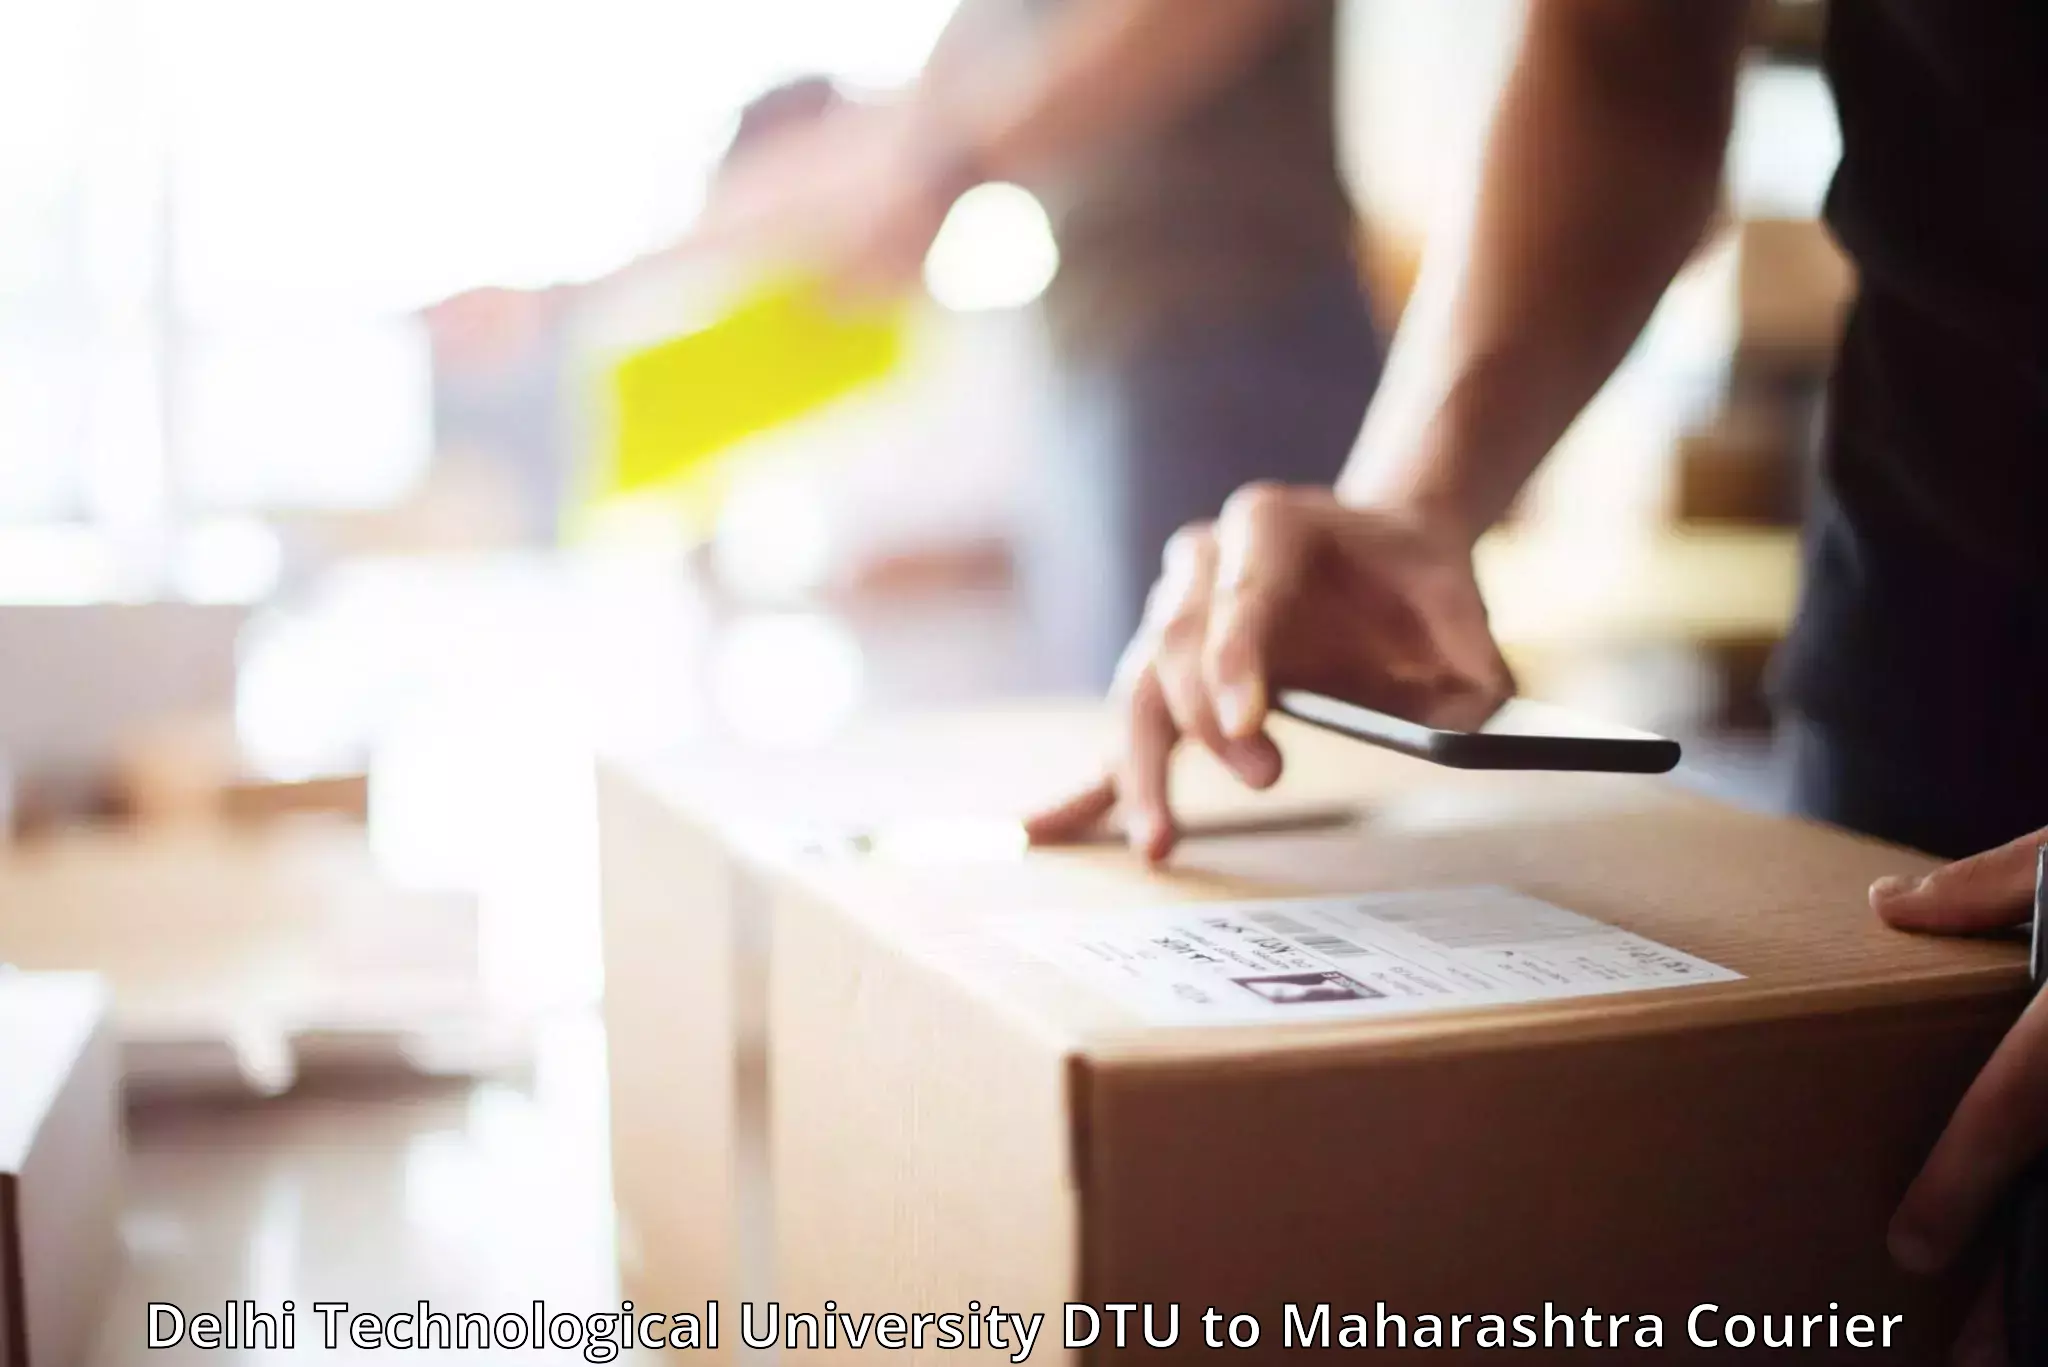 Hassle-free luggage shipping Delhi Technological University DTU to Ahmedpur